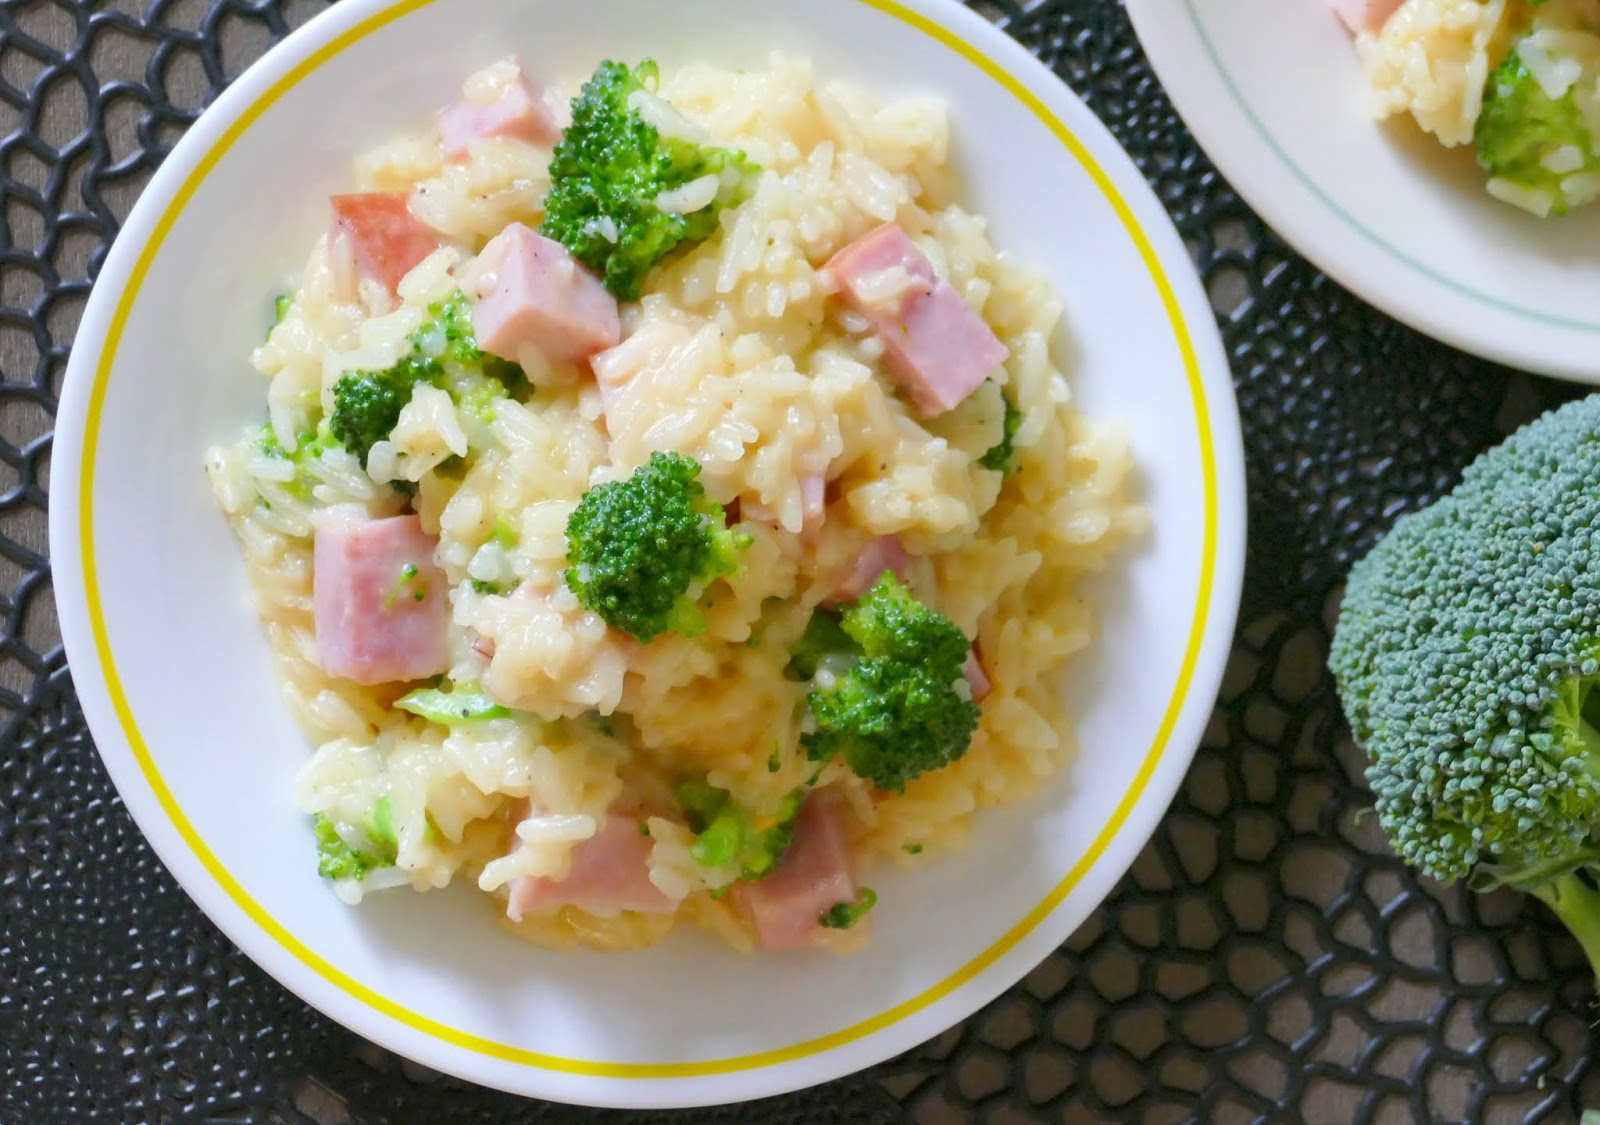 This ham cheesy broccoli rice dinner skillet is easy, delicious and one you'll want to add to your menu plan! Use any cheese you prefer and great for using leftover Easter or Christmas ham! Ready in less than 30 minutes which makes it perfect for a simple and affordable weeknight meal! 